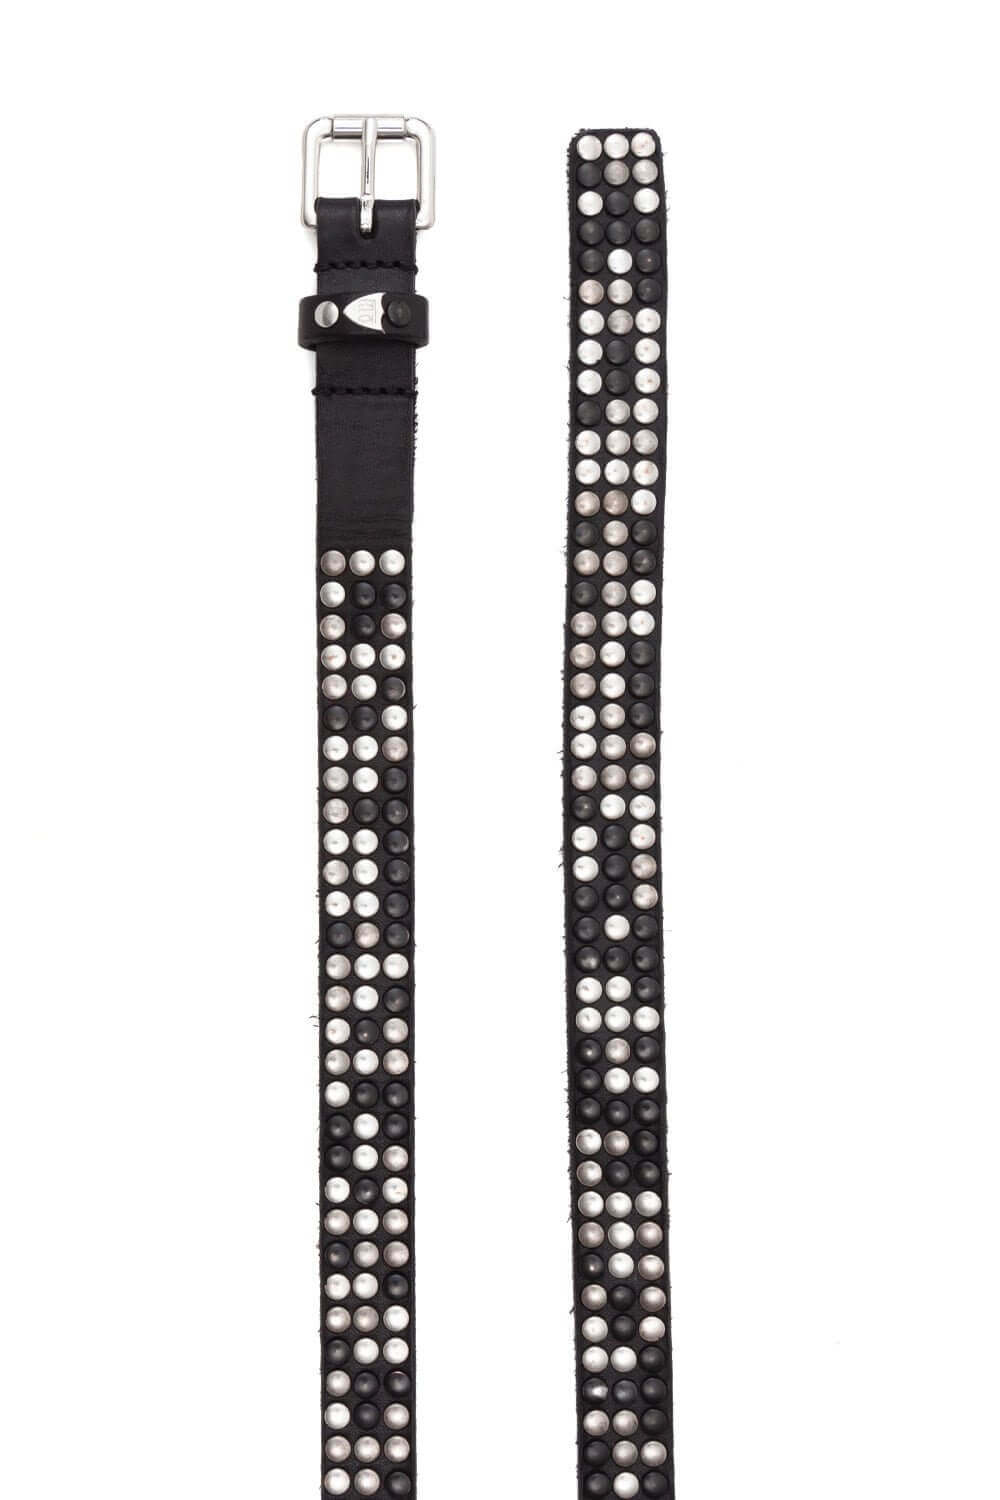 3.000 STUDS BELT Black leather belt with studs, brass buckle, loop with studs and engraved logo. Height 2 cm. Made in Italy. HTC LOS ANGELES